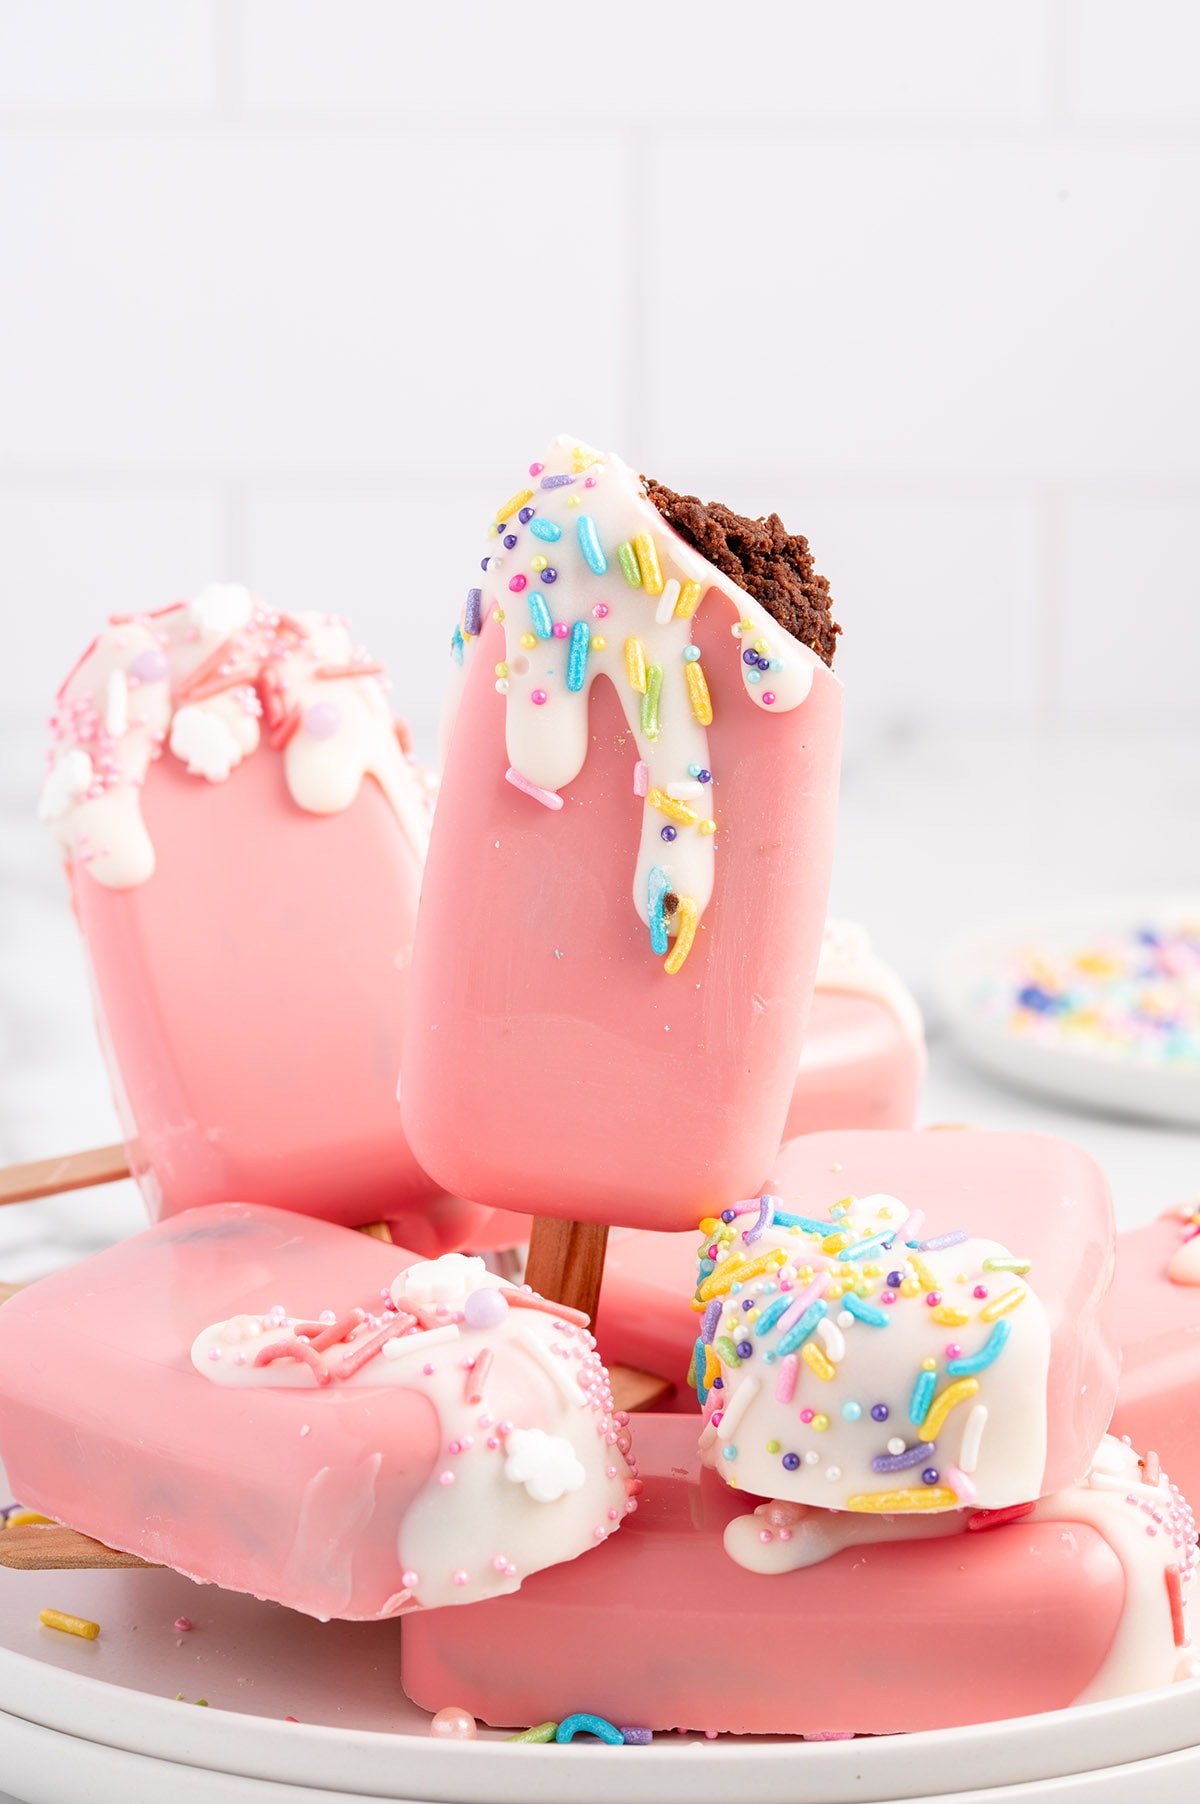 cakesicles on a plate